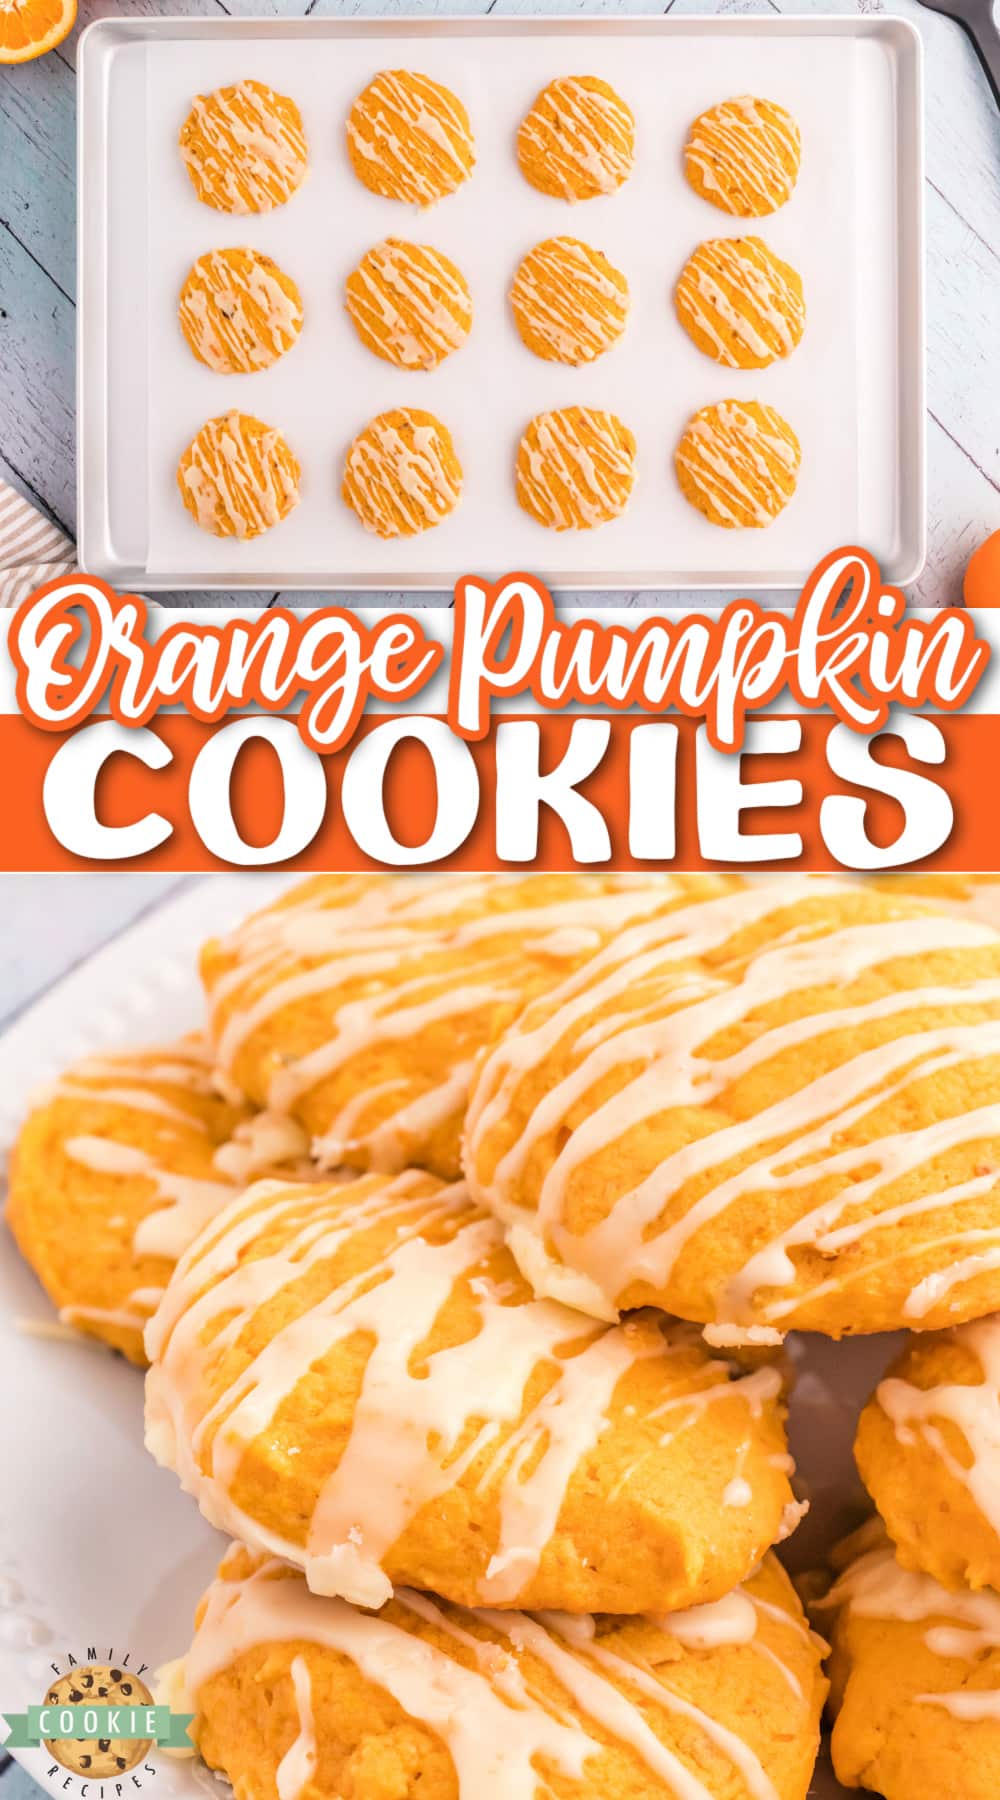 Orange Pumpkin Cookies are soft, chewy and perfect for fall! This pumpkin cookie recipe is topped with a simple orange glaze that complements the pumpkin flavor perfectly. 